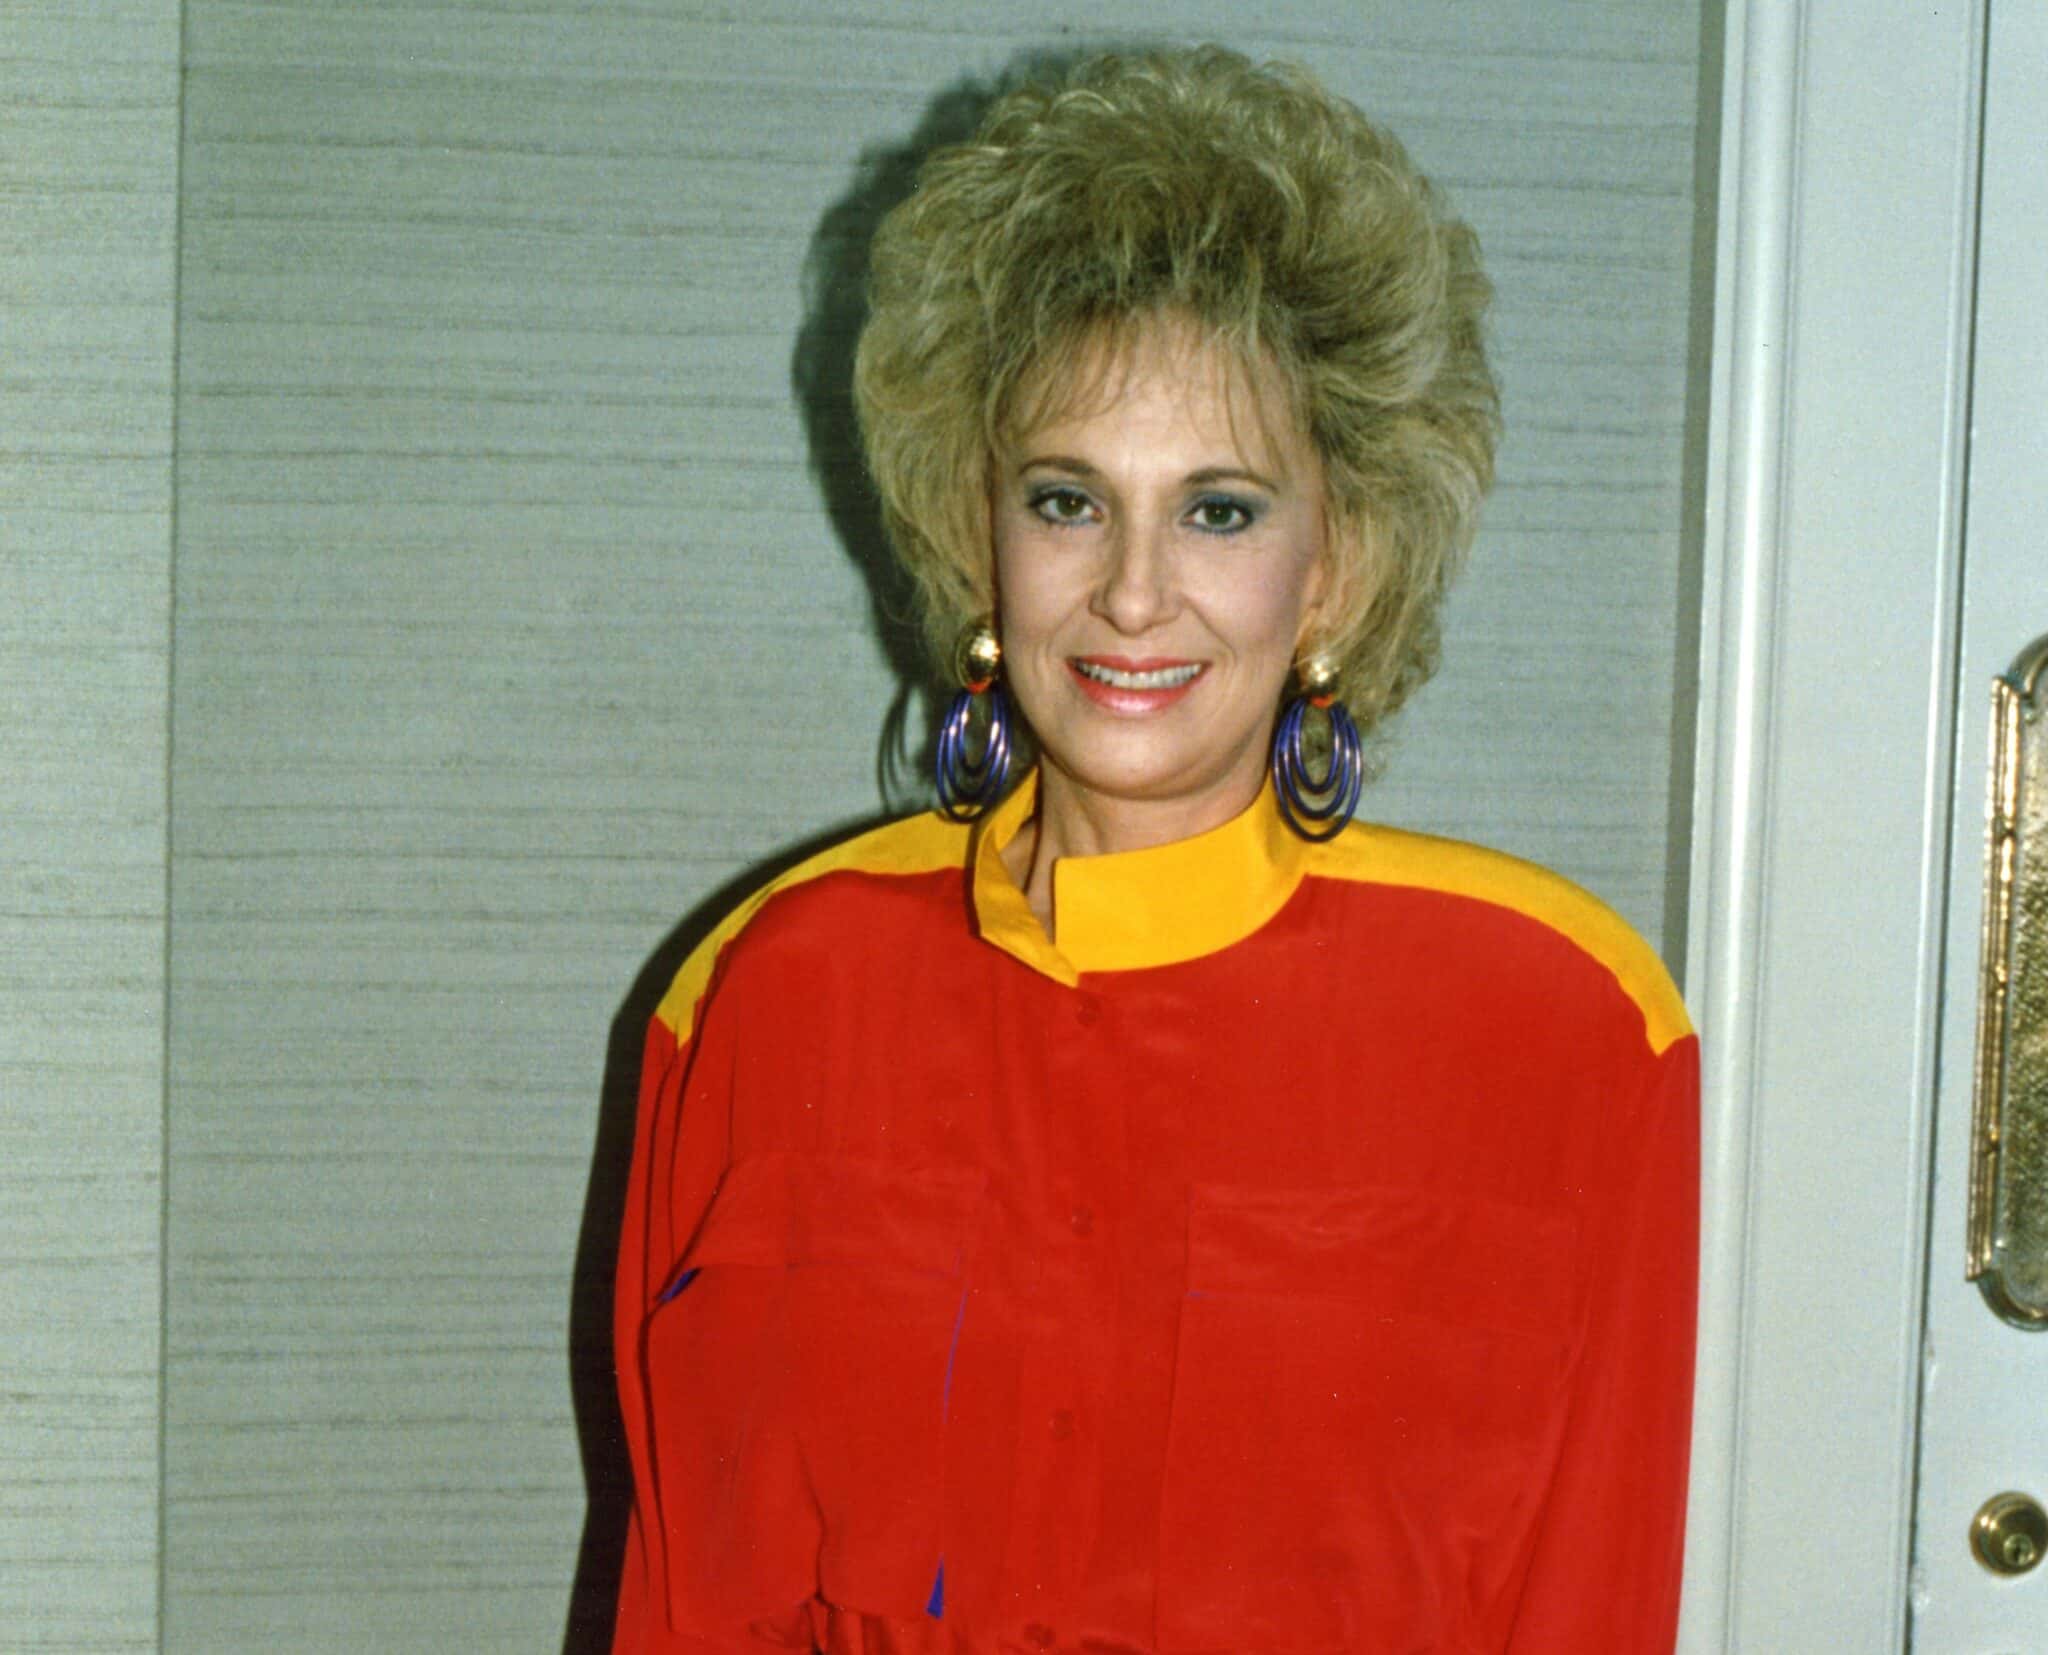 Tragic Facts About Tammy Wynette, The First Lady Of Country